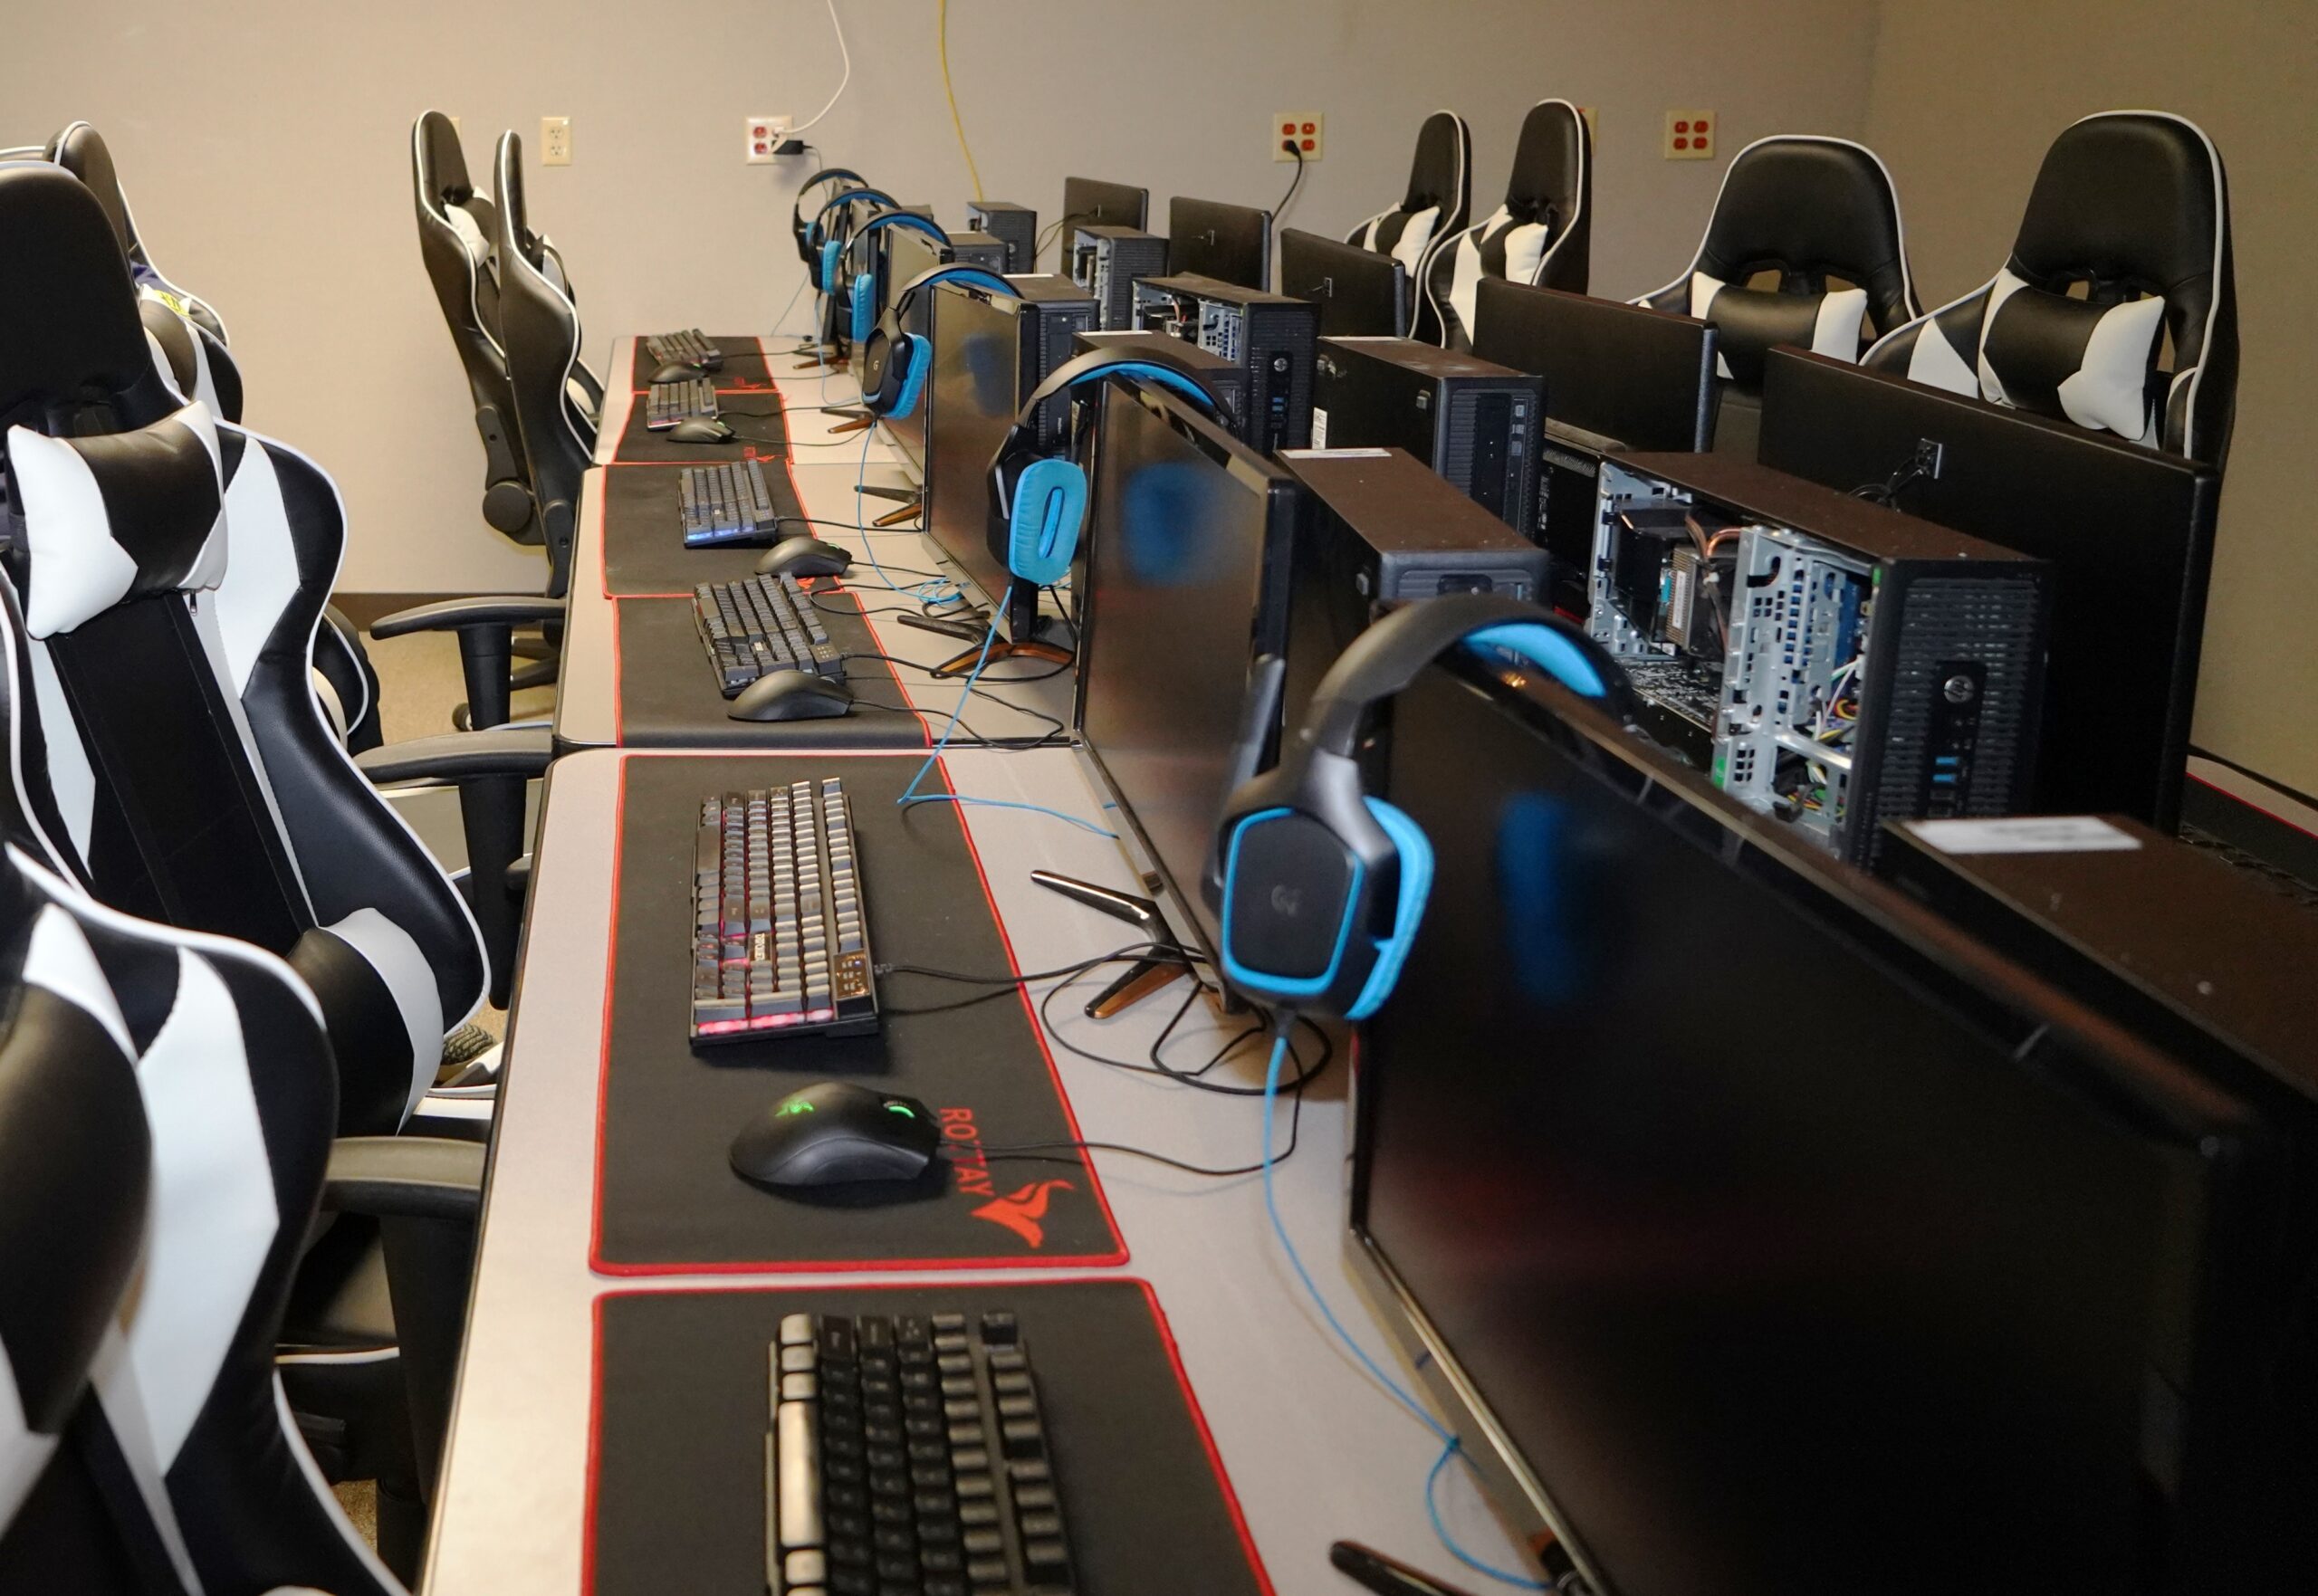 The esports lab at Montello High School sits empty before students arrive for practice